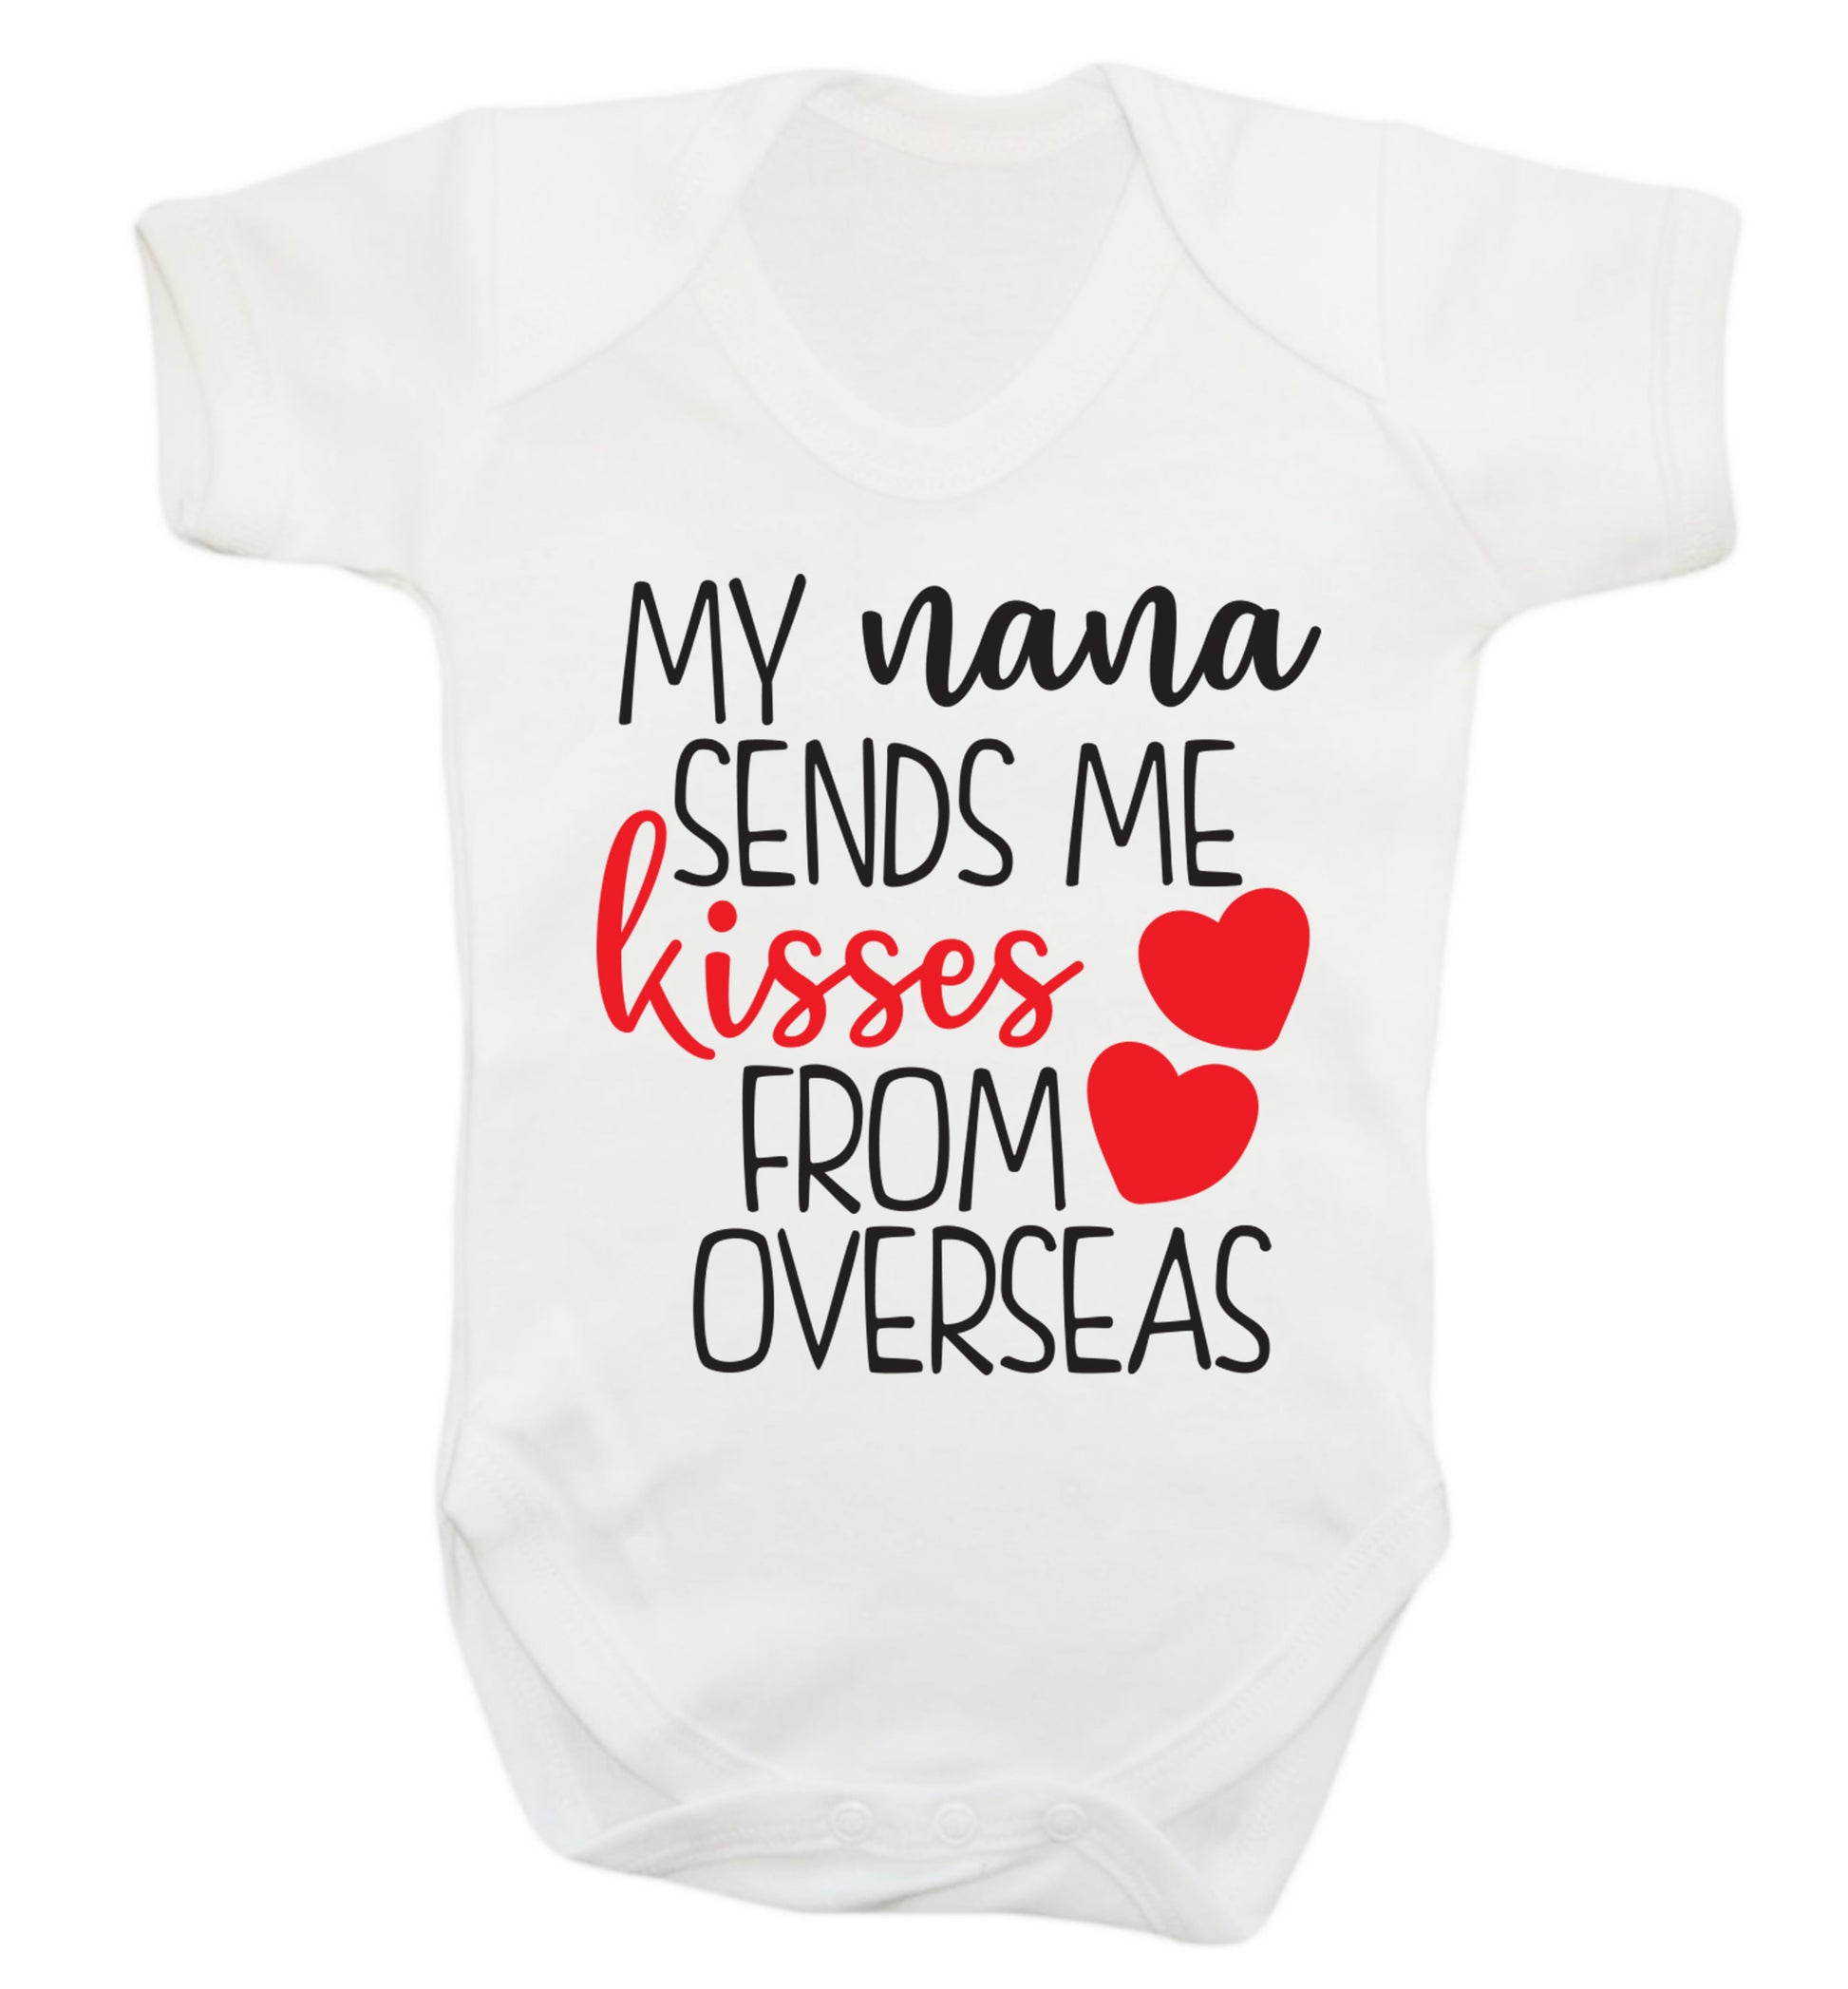 My nana sends me kisses from overseas Baby Vest white 18-24 months